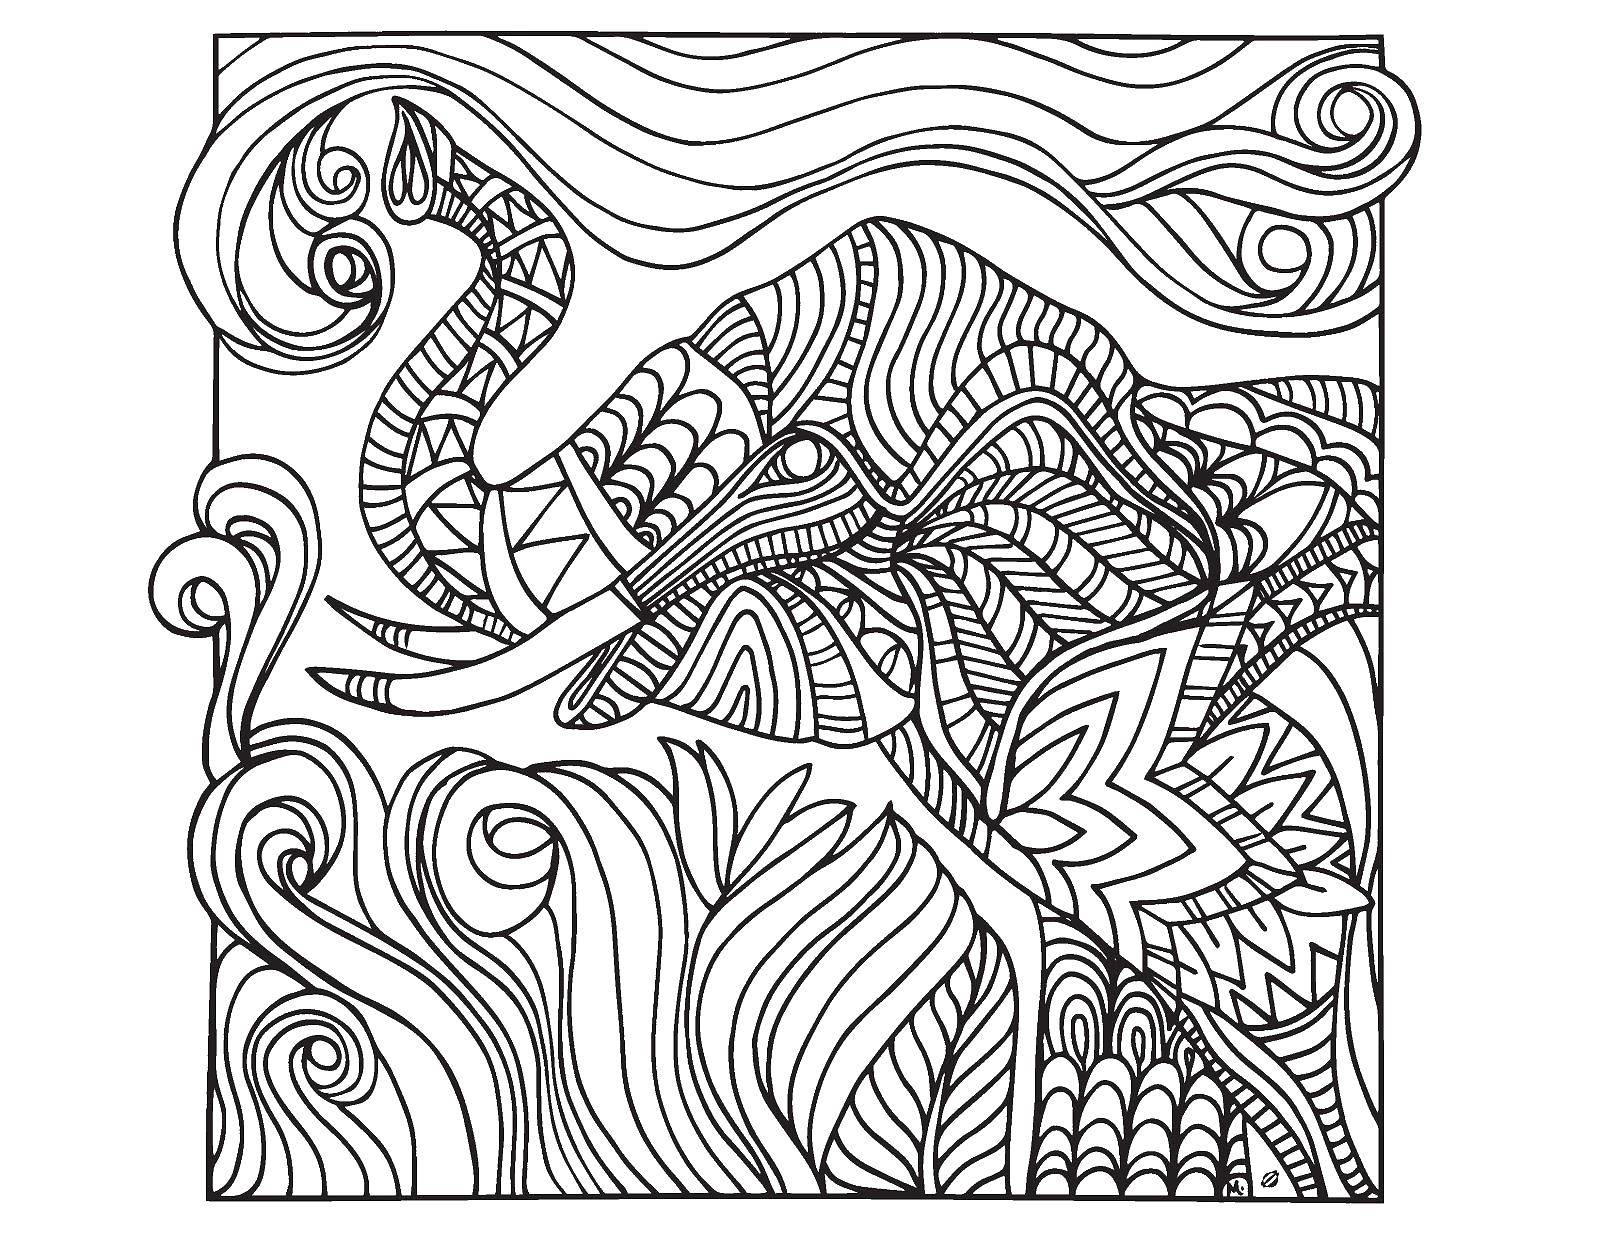 Coloring The elephant and the grass in patterns. Category patterns. Tags:  patterns, anti-stress, elephants.